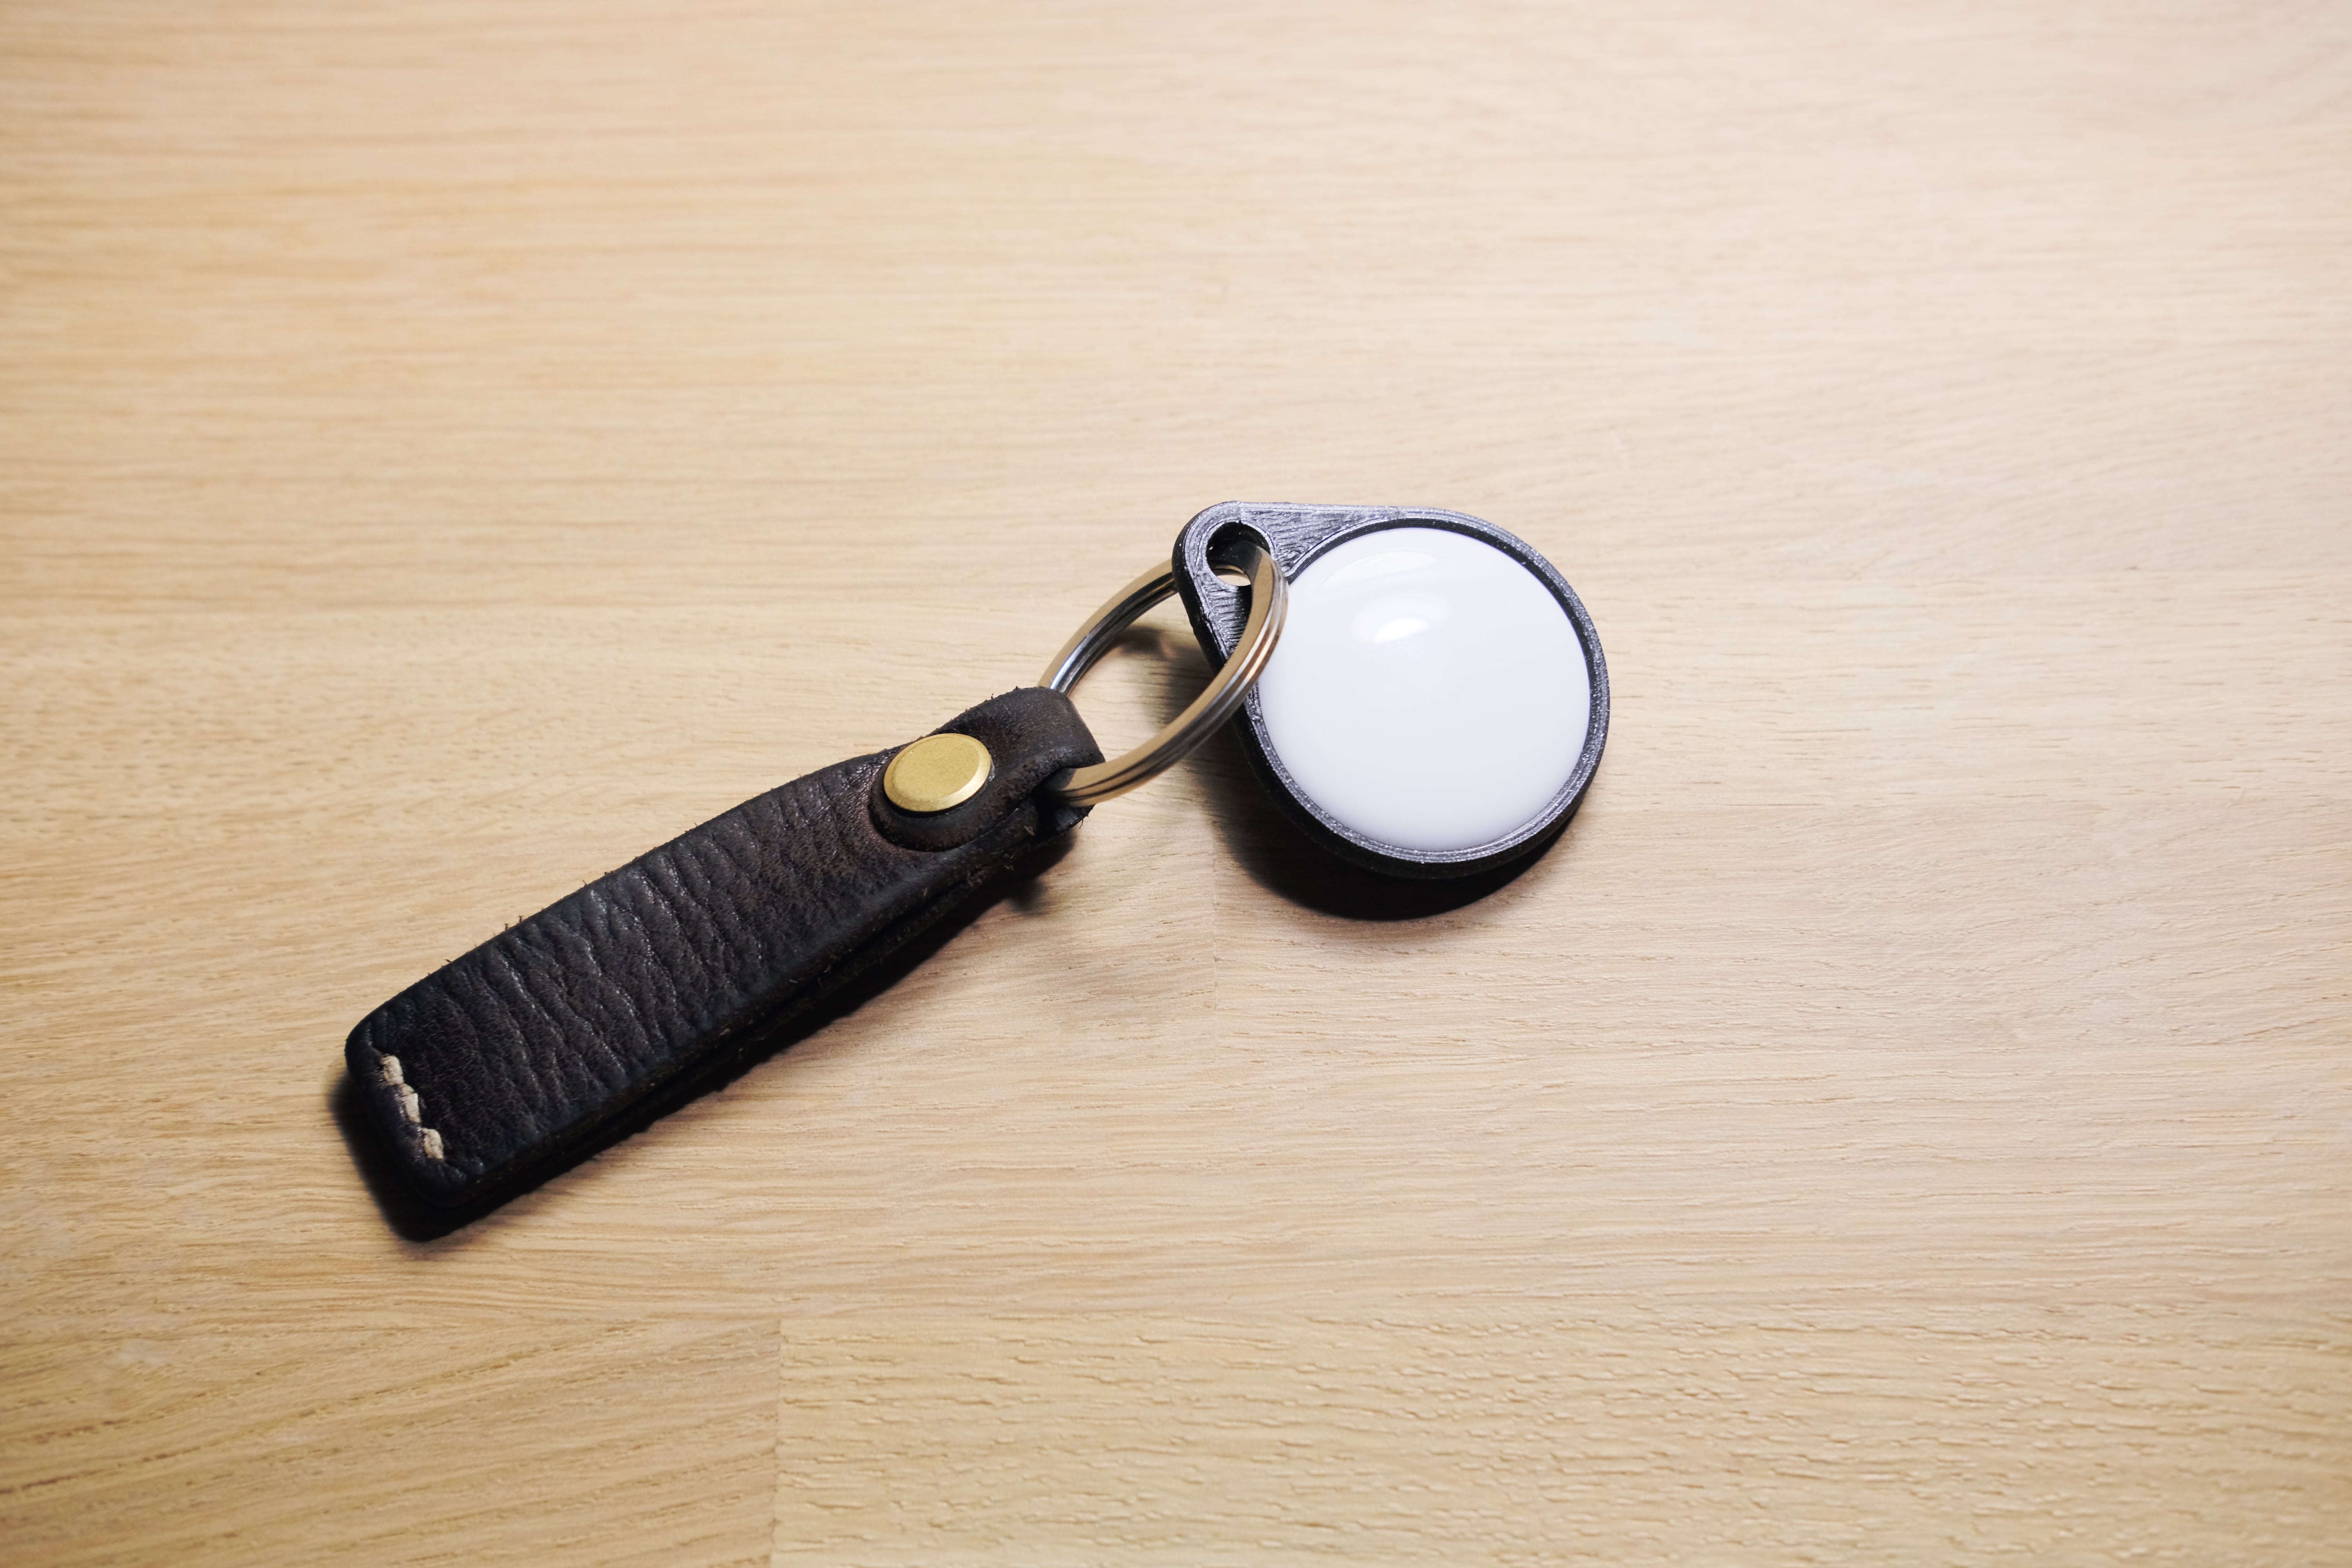 Airtag strong keyring / keychain holder by Thomas | Download free STL ...